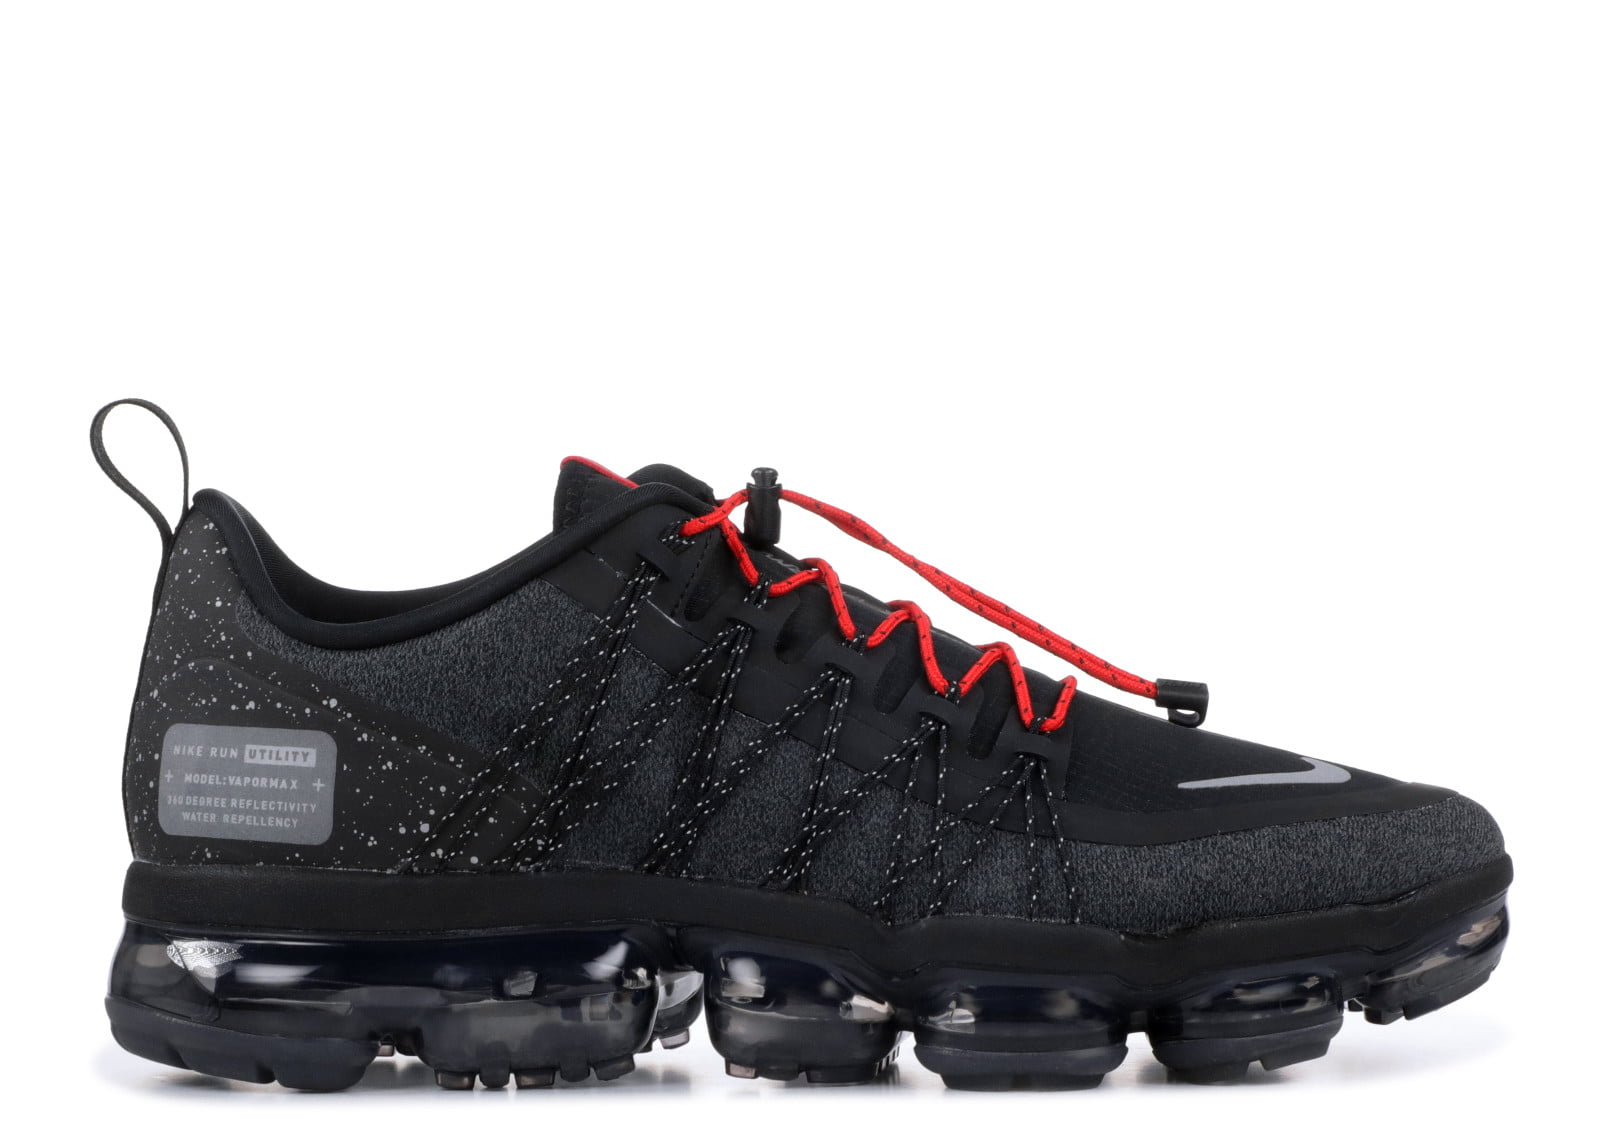 Nike Air Vapormax Run Utility Junior Outlet Online, UP TO 70% OFF